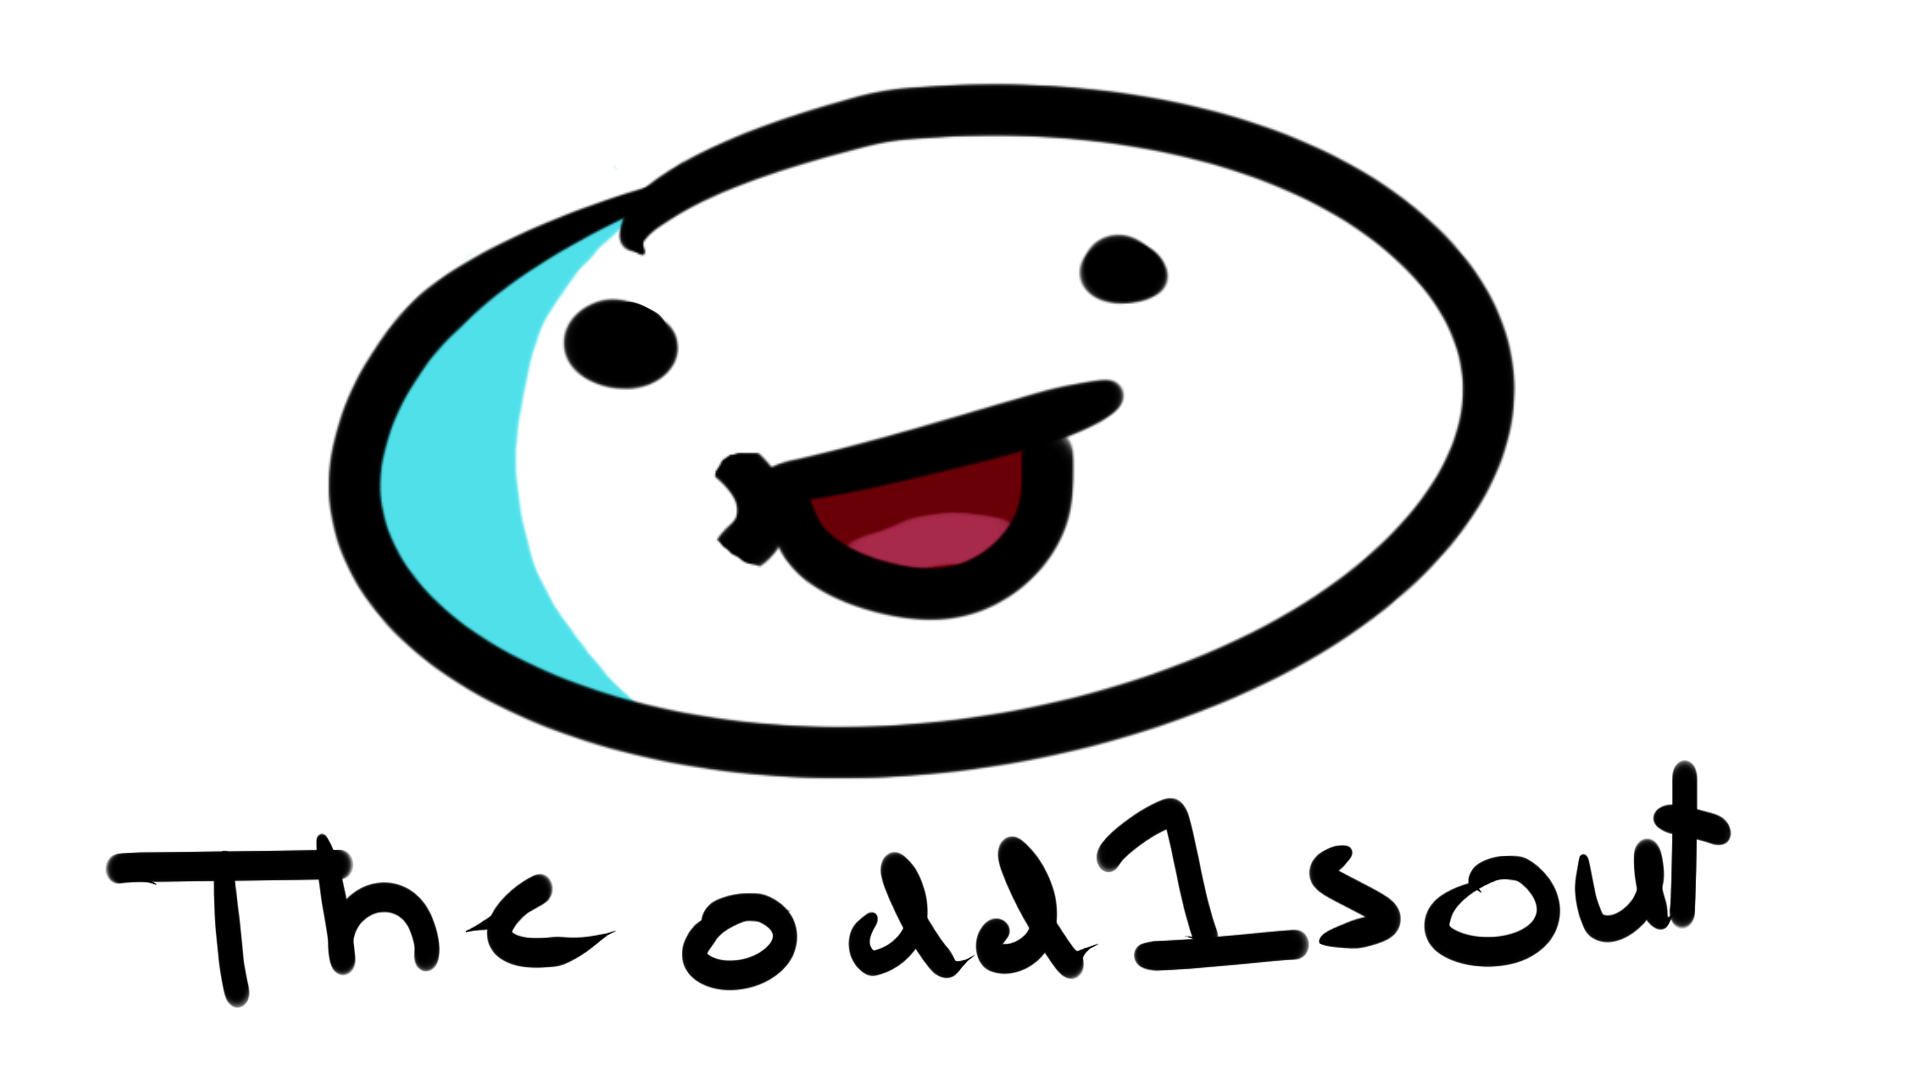 TheOdd1sOut by grizzd on Newgrounds